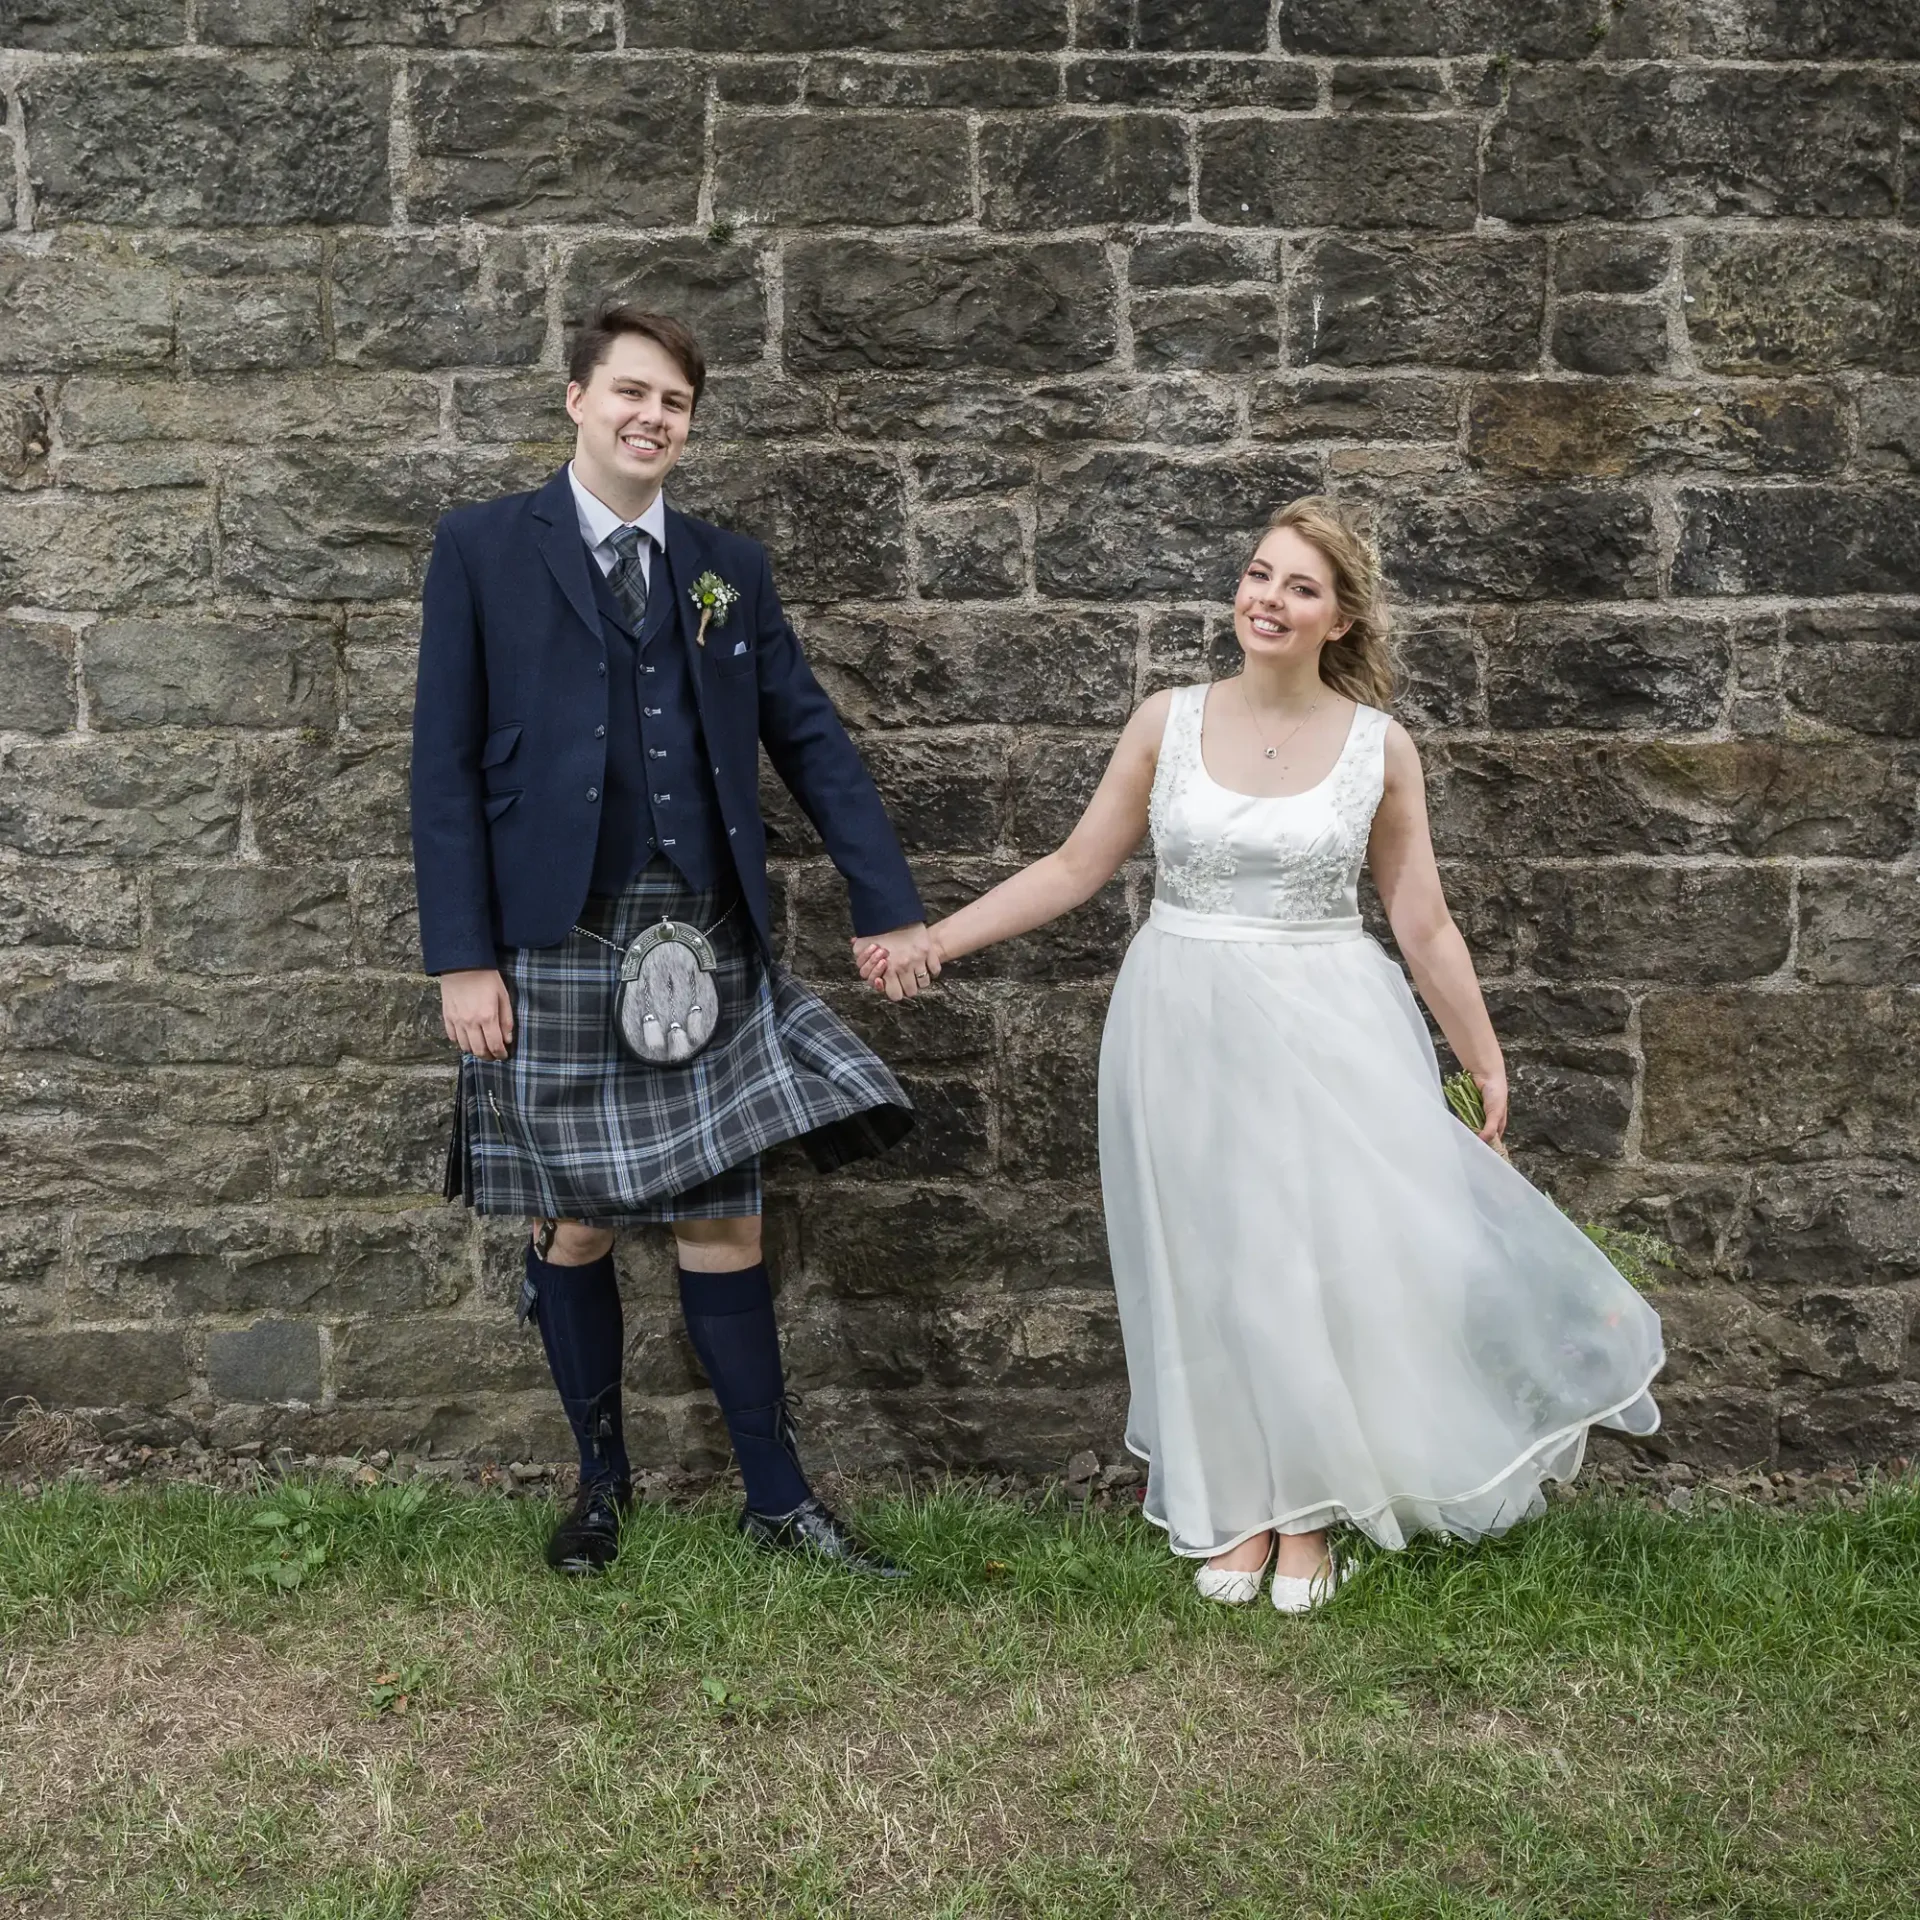 A bride and groom smiling and holding hands in front of a stone wall, the groom wearing a kilt and the bride in a white dress.